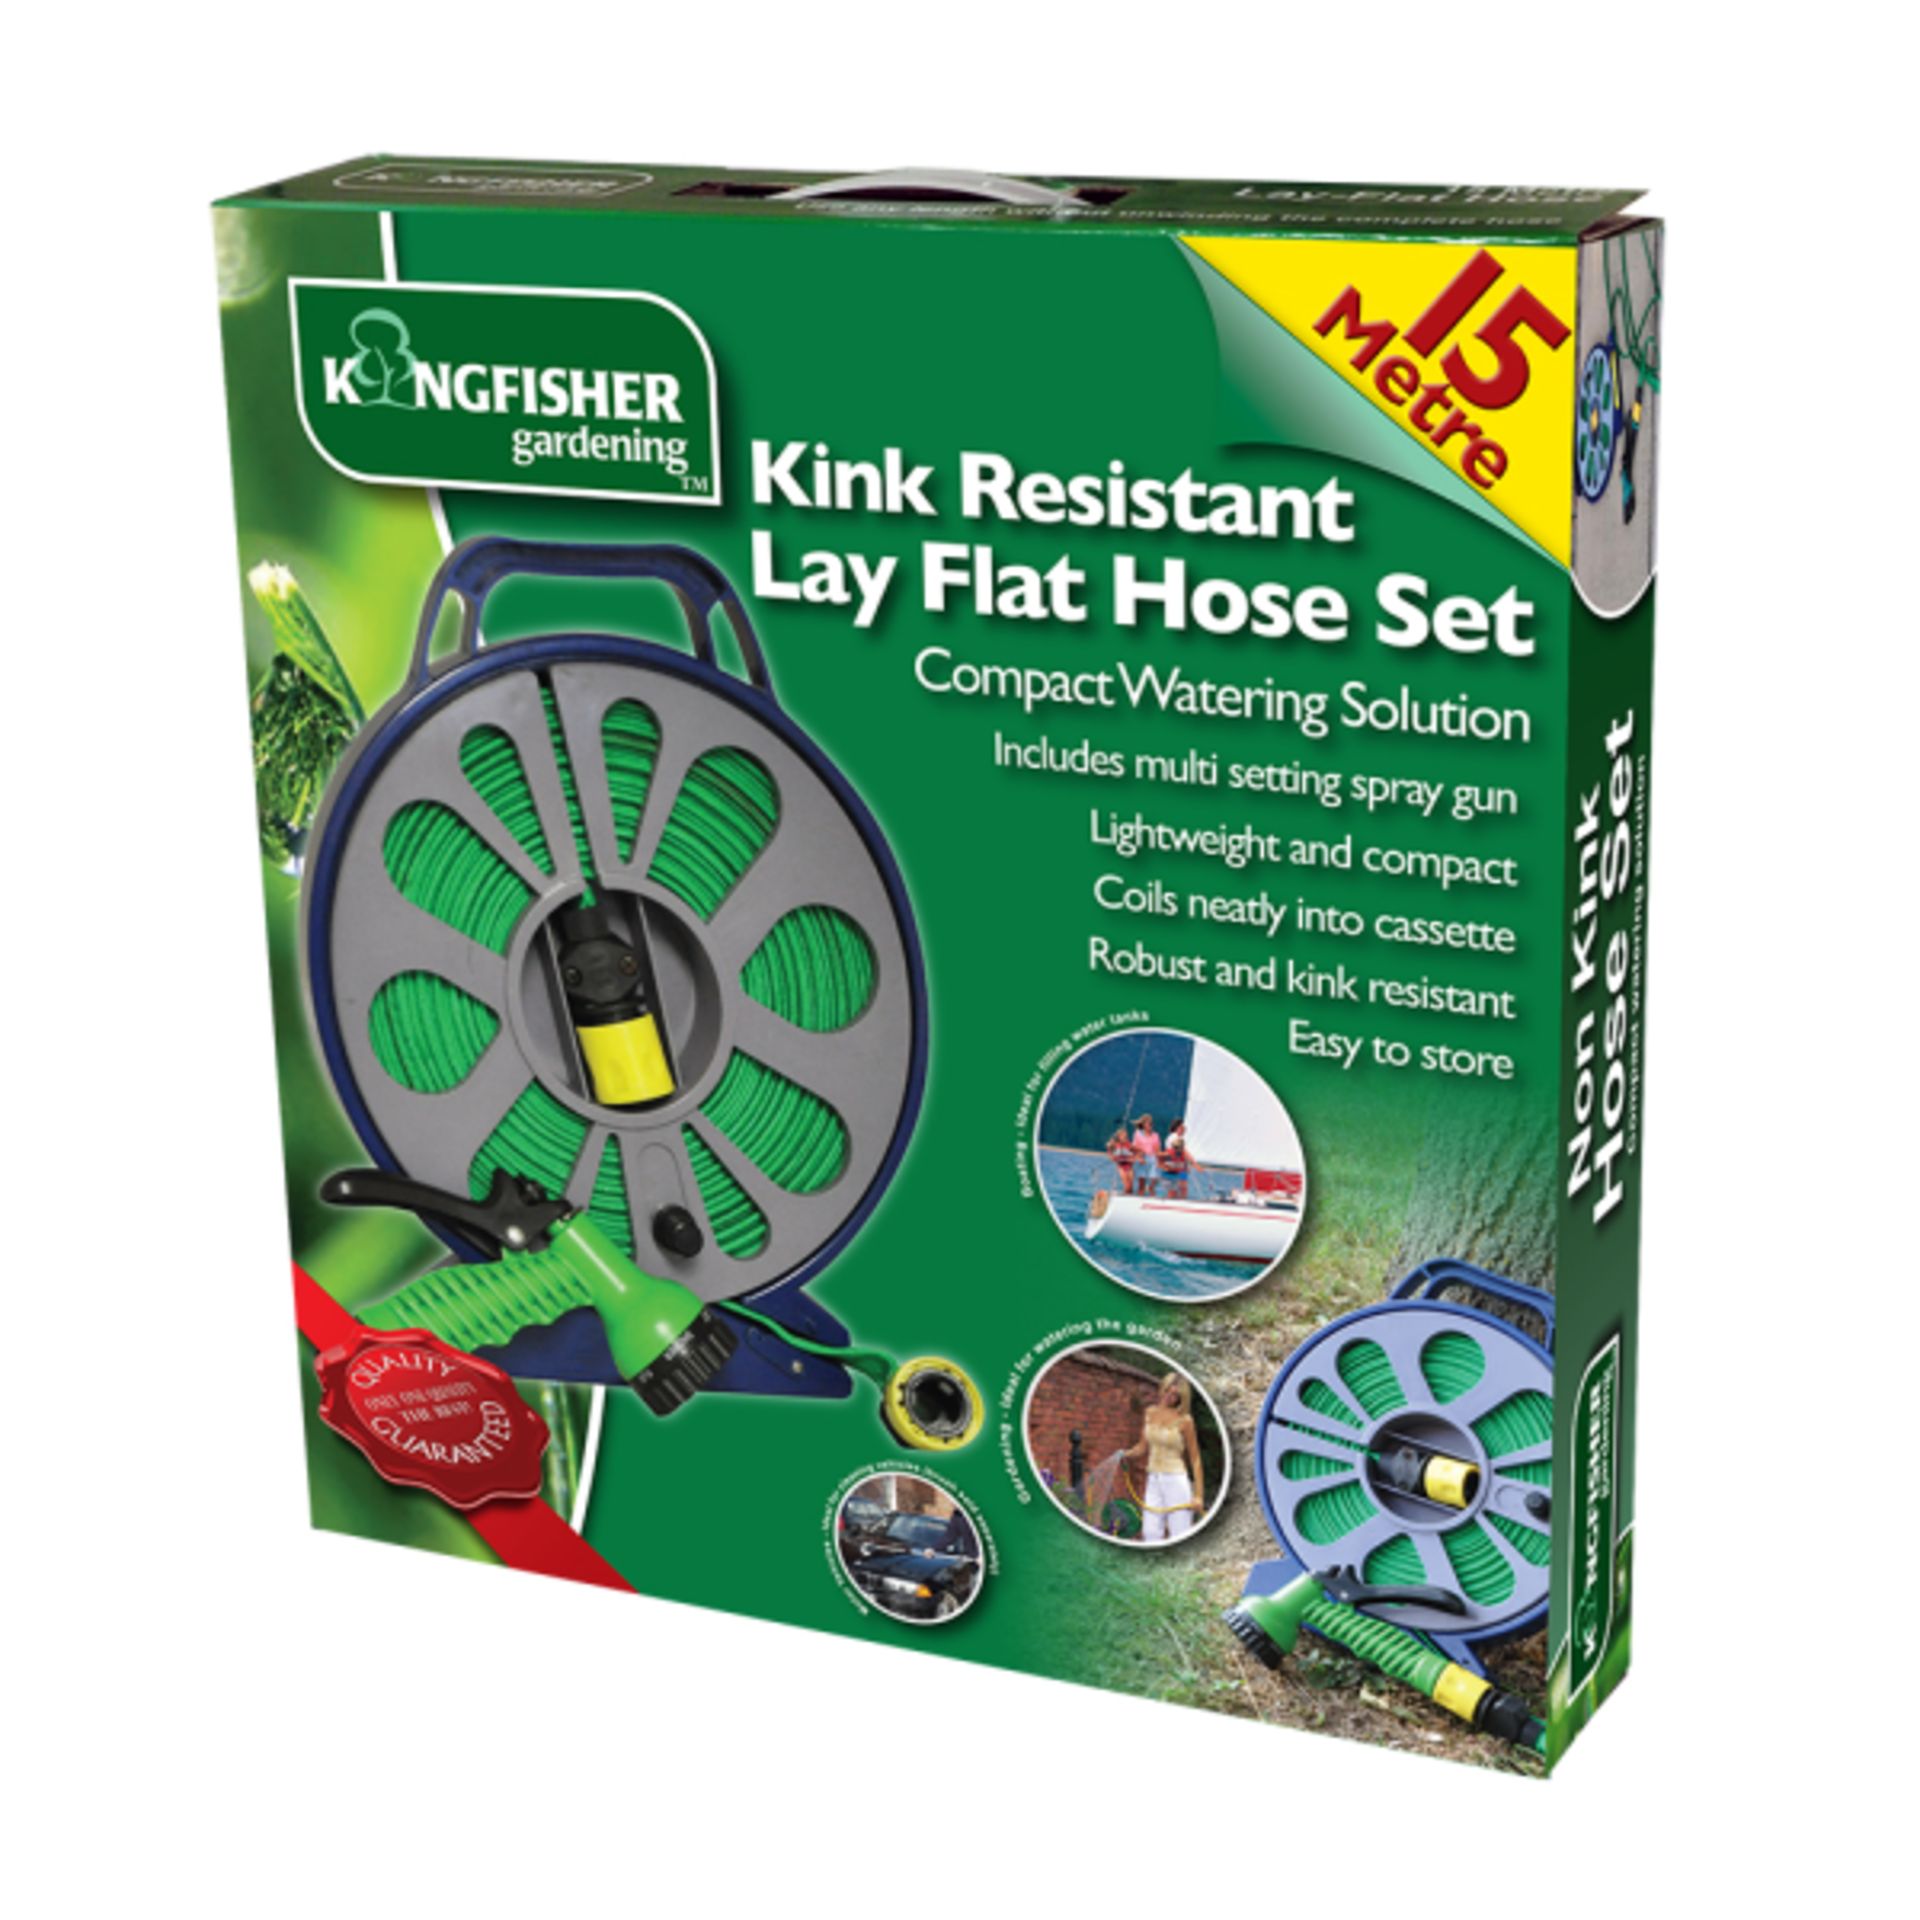 V *TRADE QTY* Brand New Kink Resistant Lay Flat Hose Set 15 metres (approx) With Multi-Setting Spray - Image 2 of 2